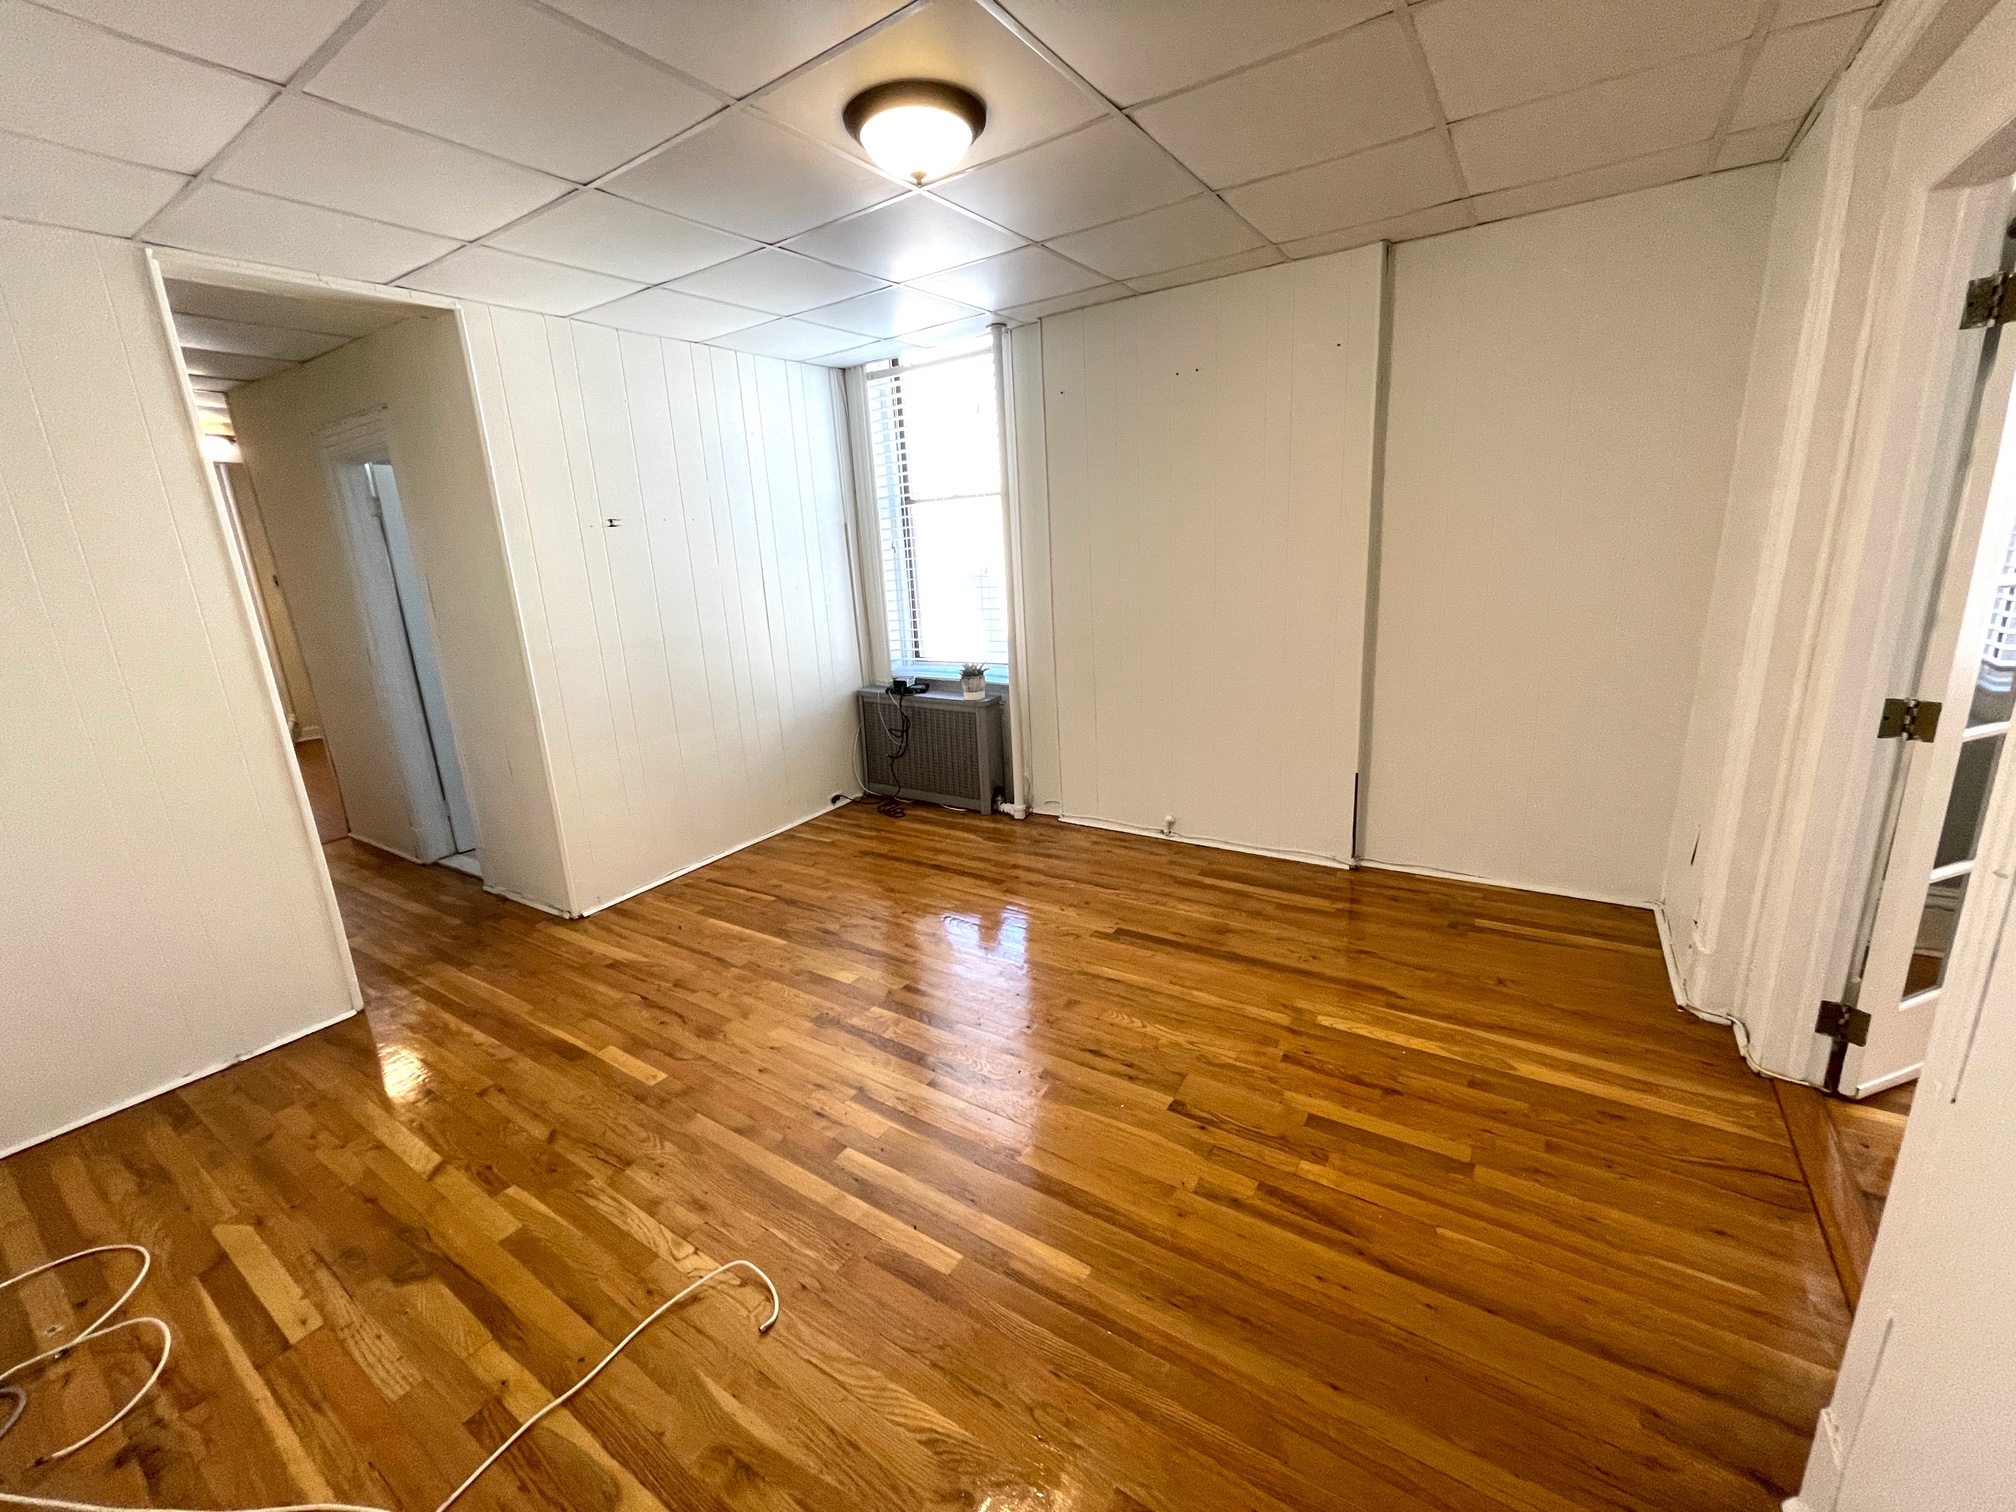 NO BROKER FEE. Amazing location huge 1 bedroom plus 2 dens on desired Hudson St!! Property features new stainless steel appliances, updated kitchen, shared laundry, plenty of closets, hardwood floors and plenty of sunlight. Could be used as a railroad 2 bedroom. Located on the 4th floor No Pets